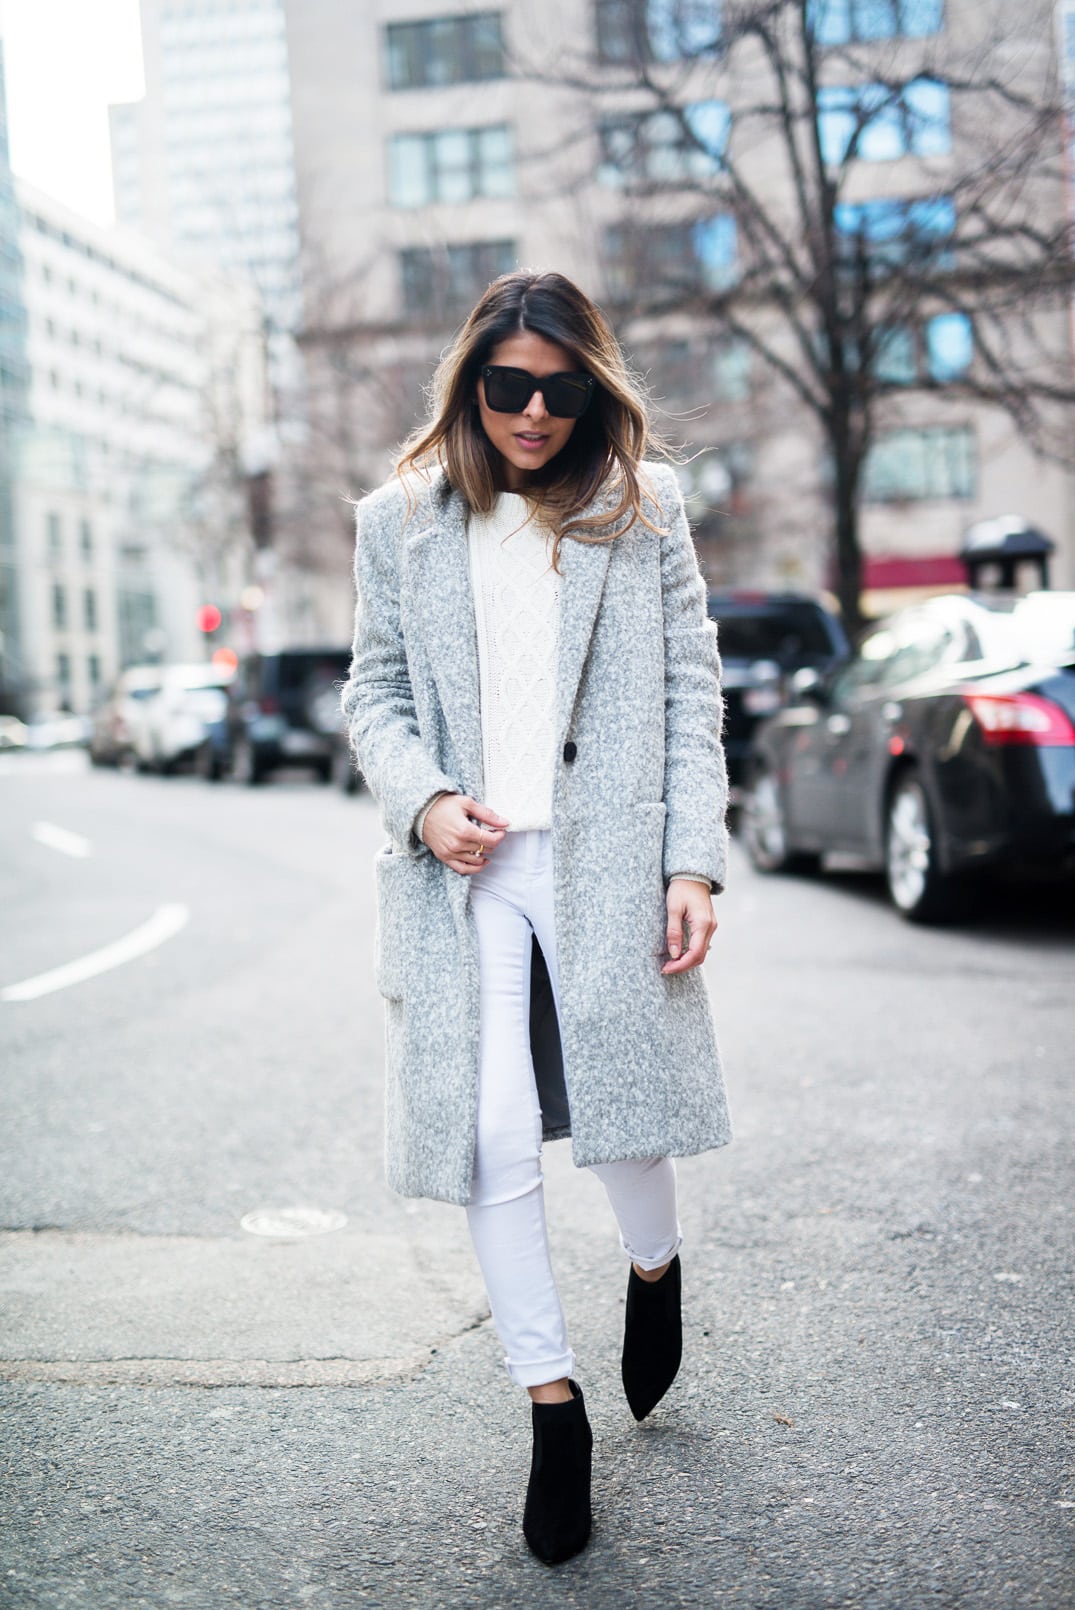 Pam Hetlinger, The Girl From Panama, wearing a Zac Posen Gray Coat, White Jeans, White Sweater, Black booties, Celine Sunglasses. The easiest way to style a gray coat.